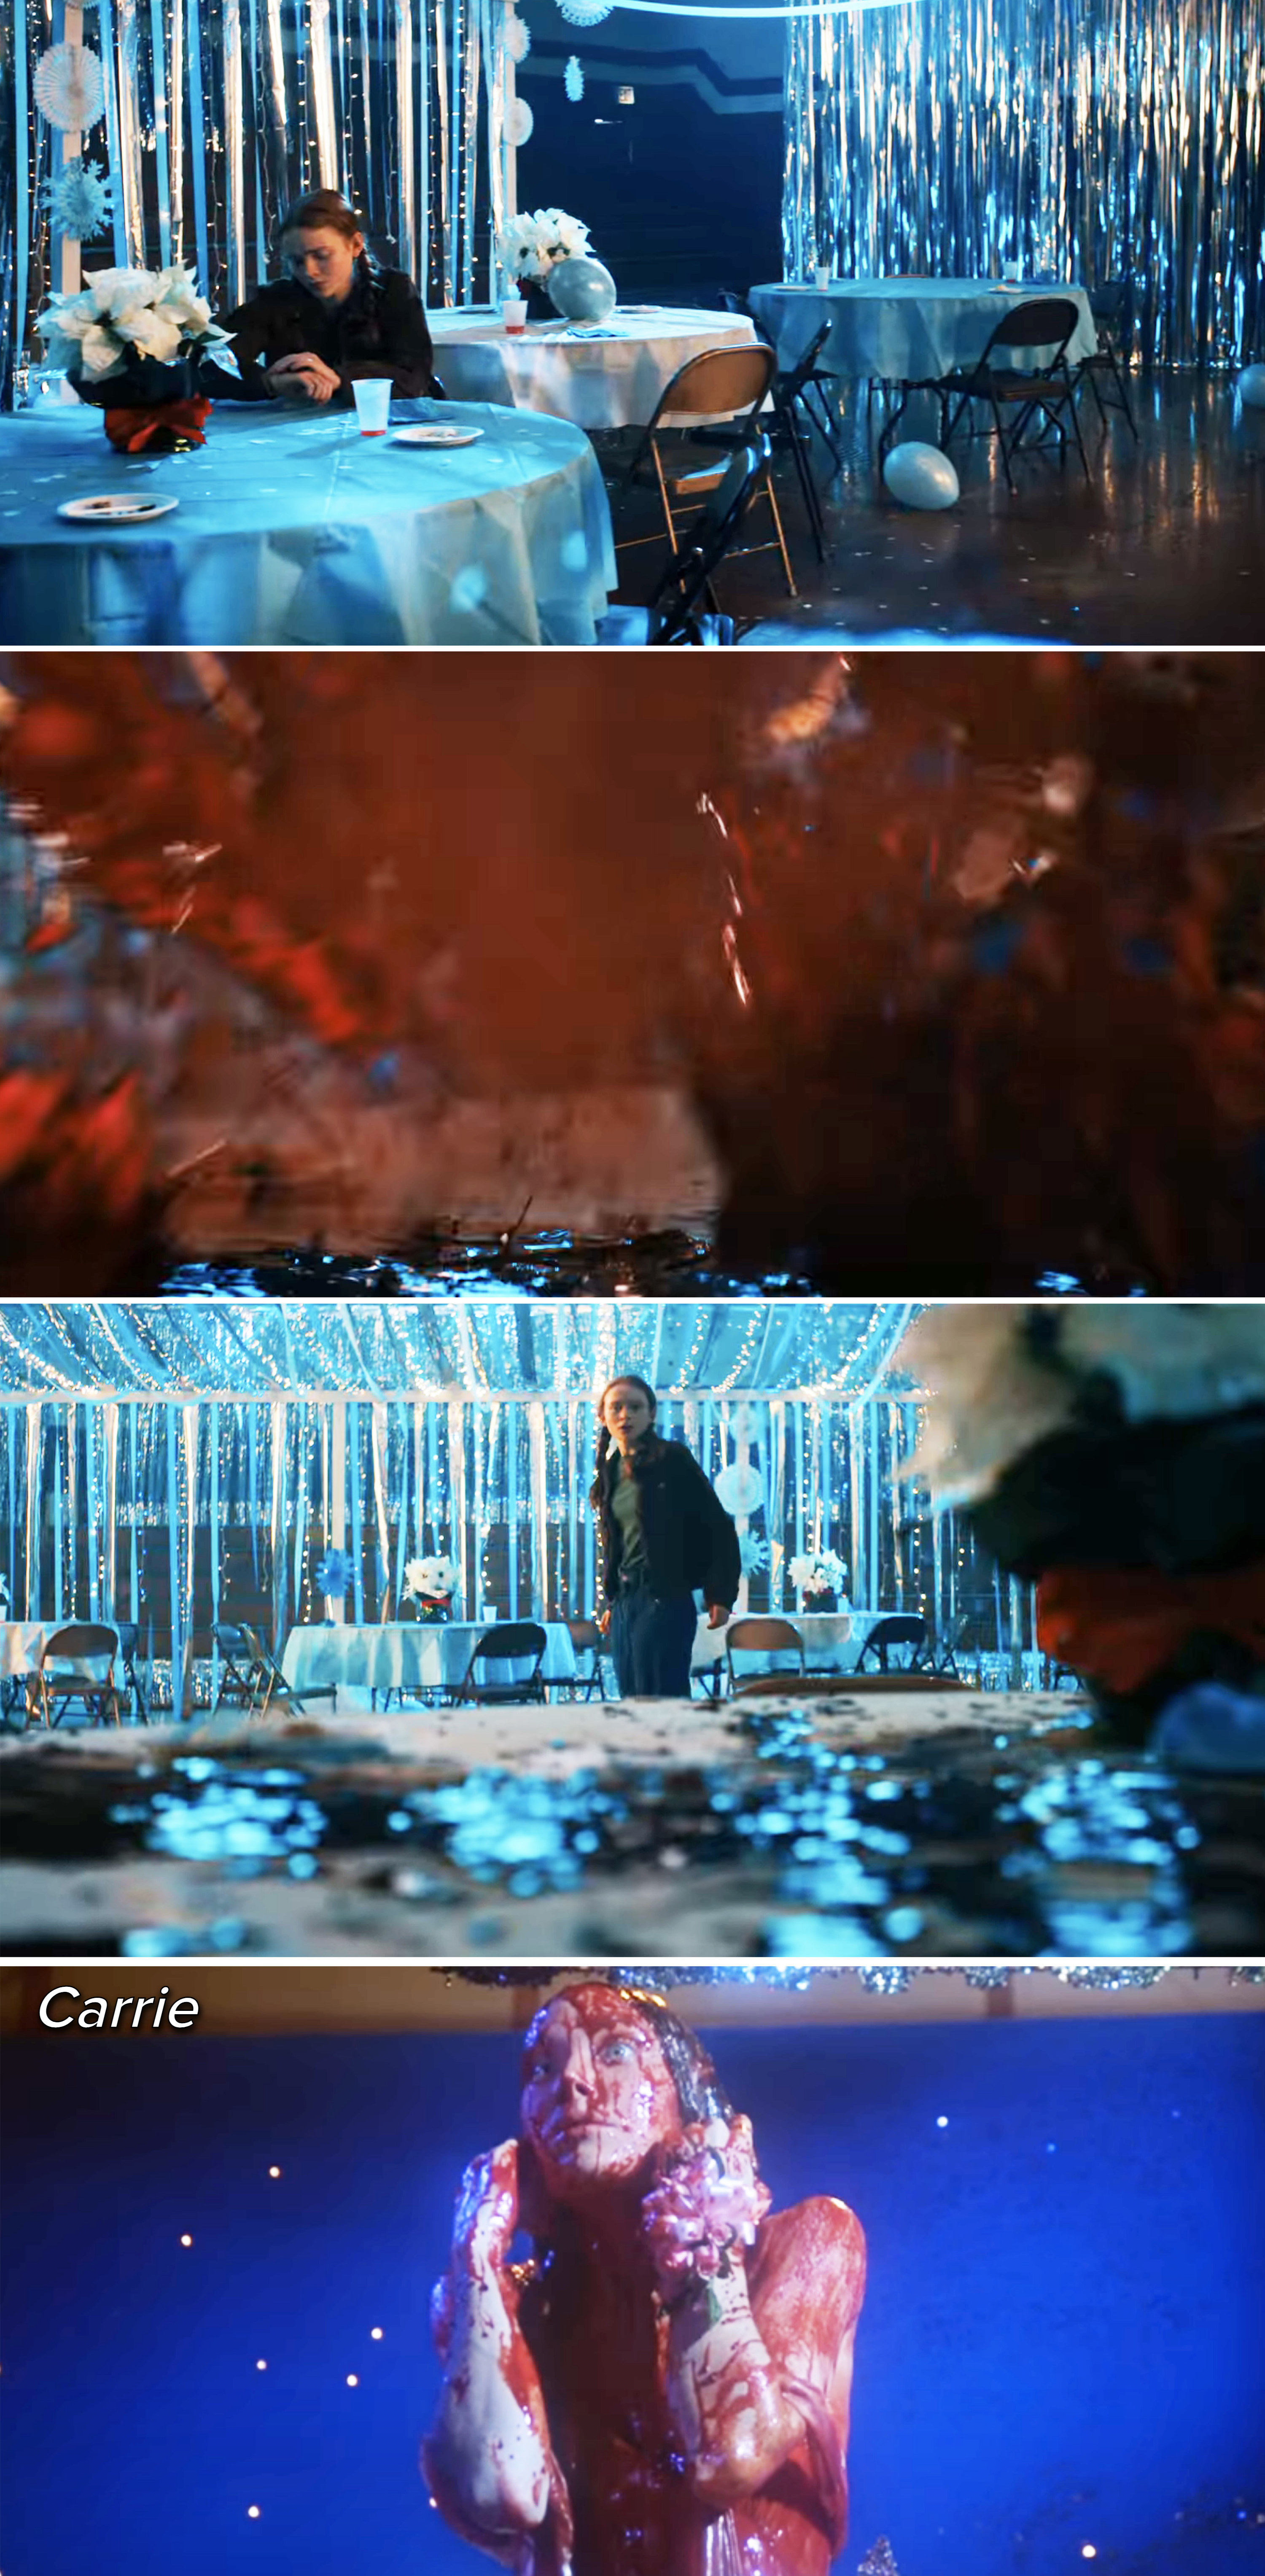 the two scenes with balloons